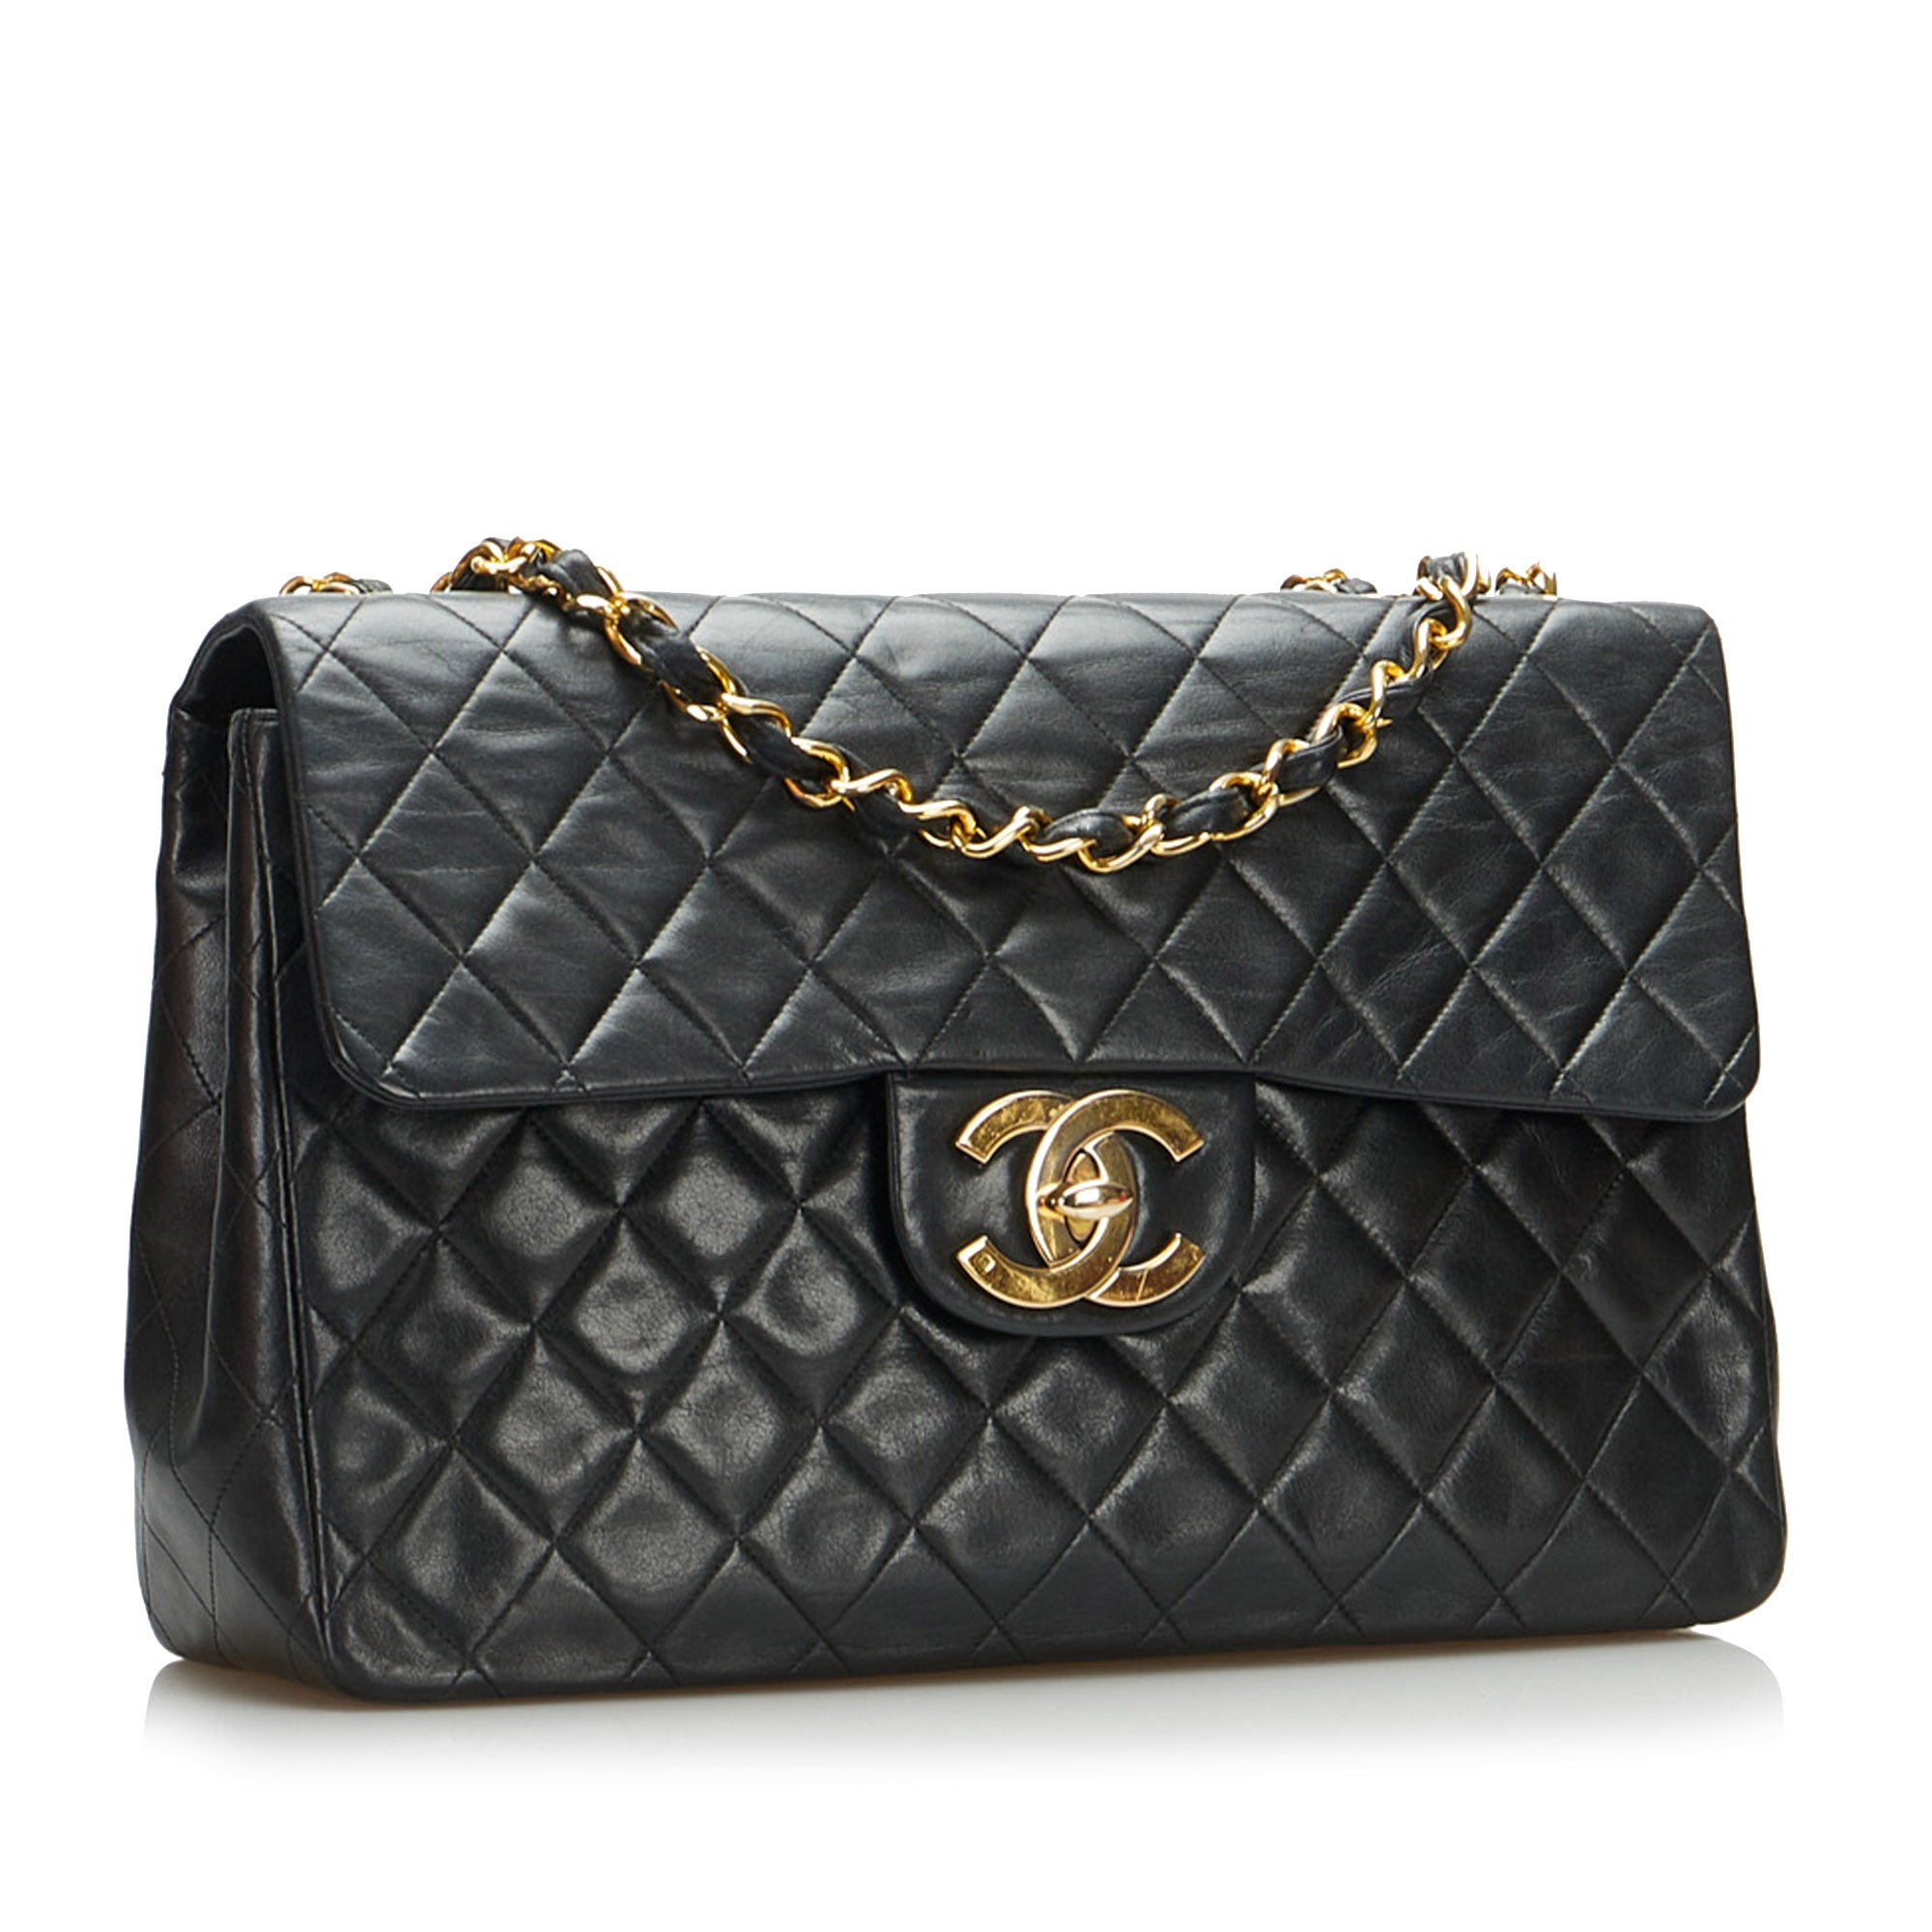 Chanel Pre-Owned 2004 diamond-quilted beach bag, Cra-wallonieShops Revival